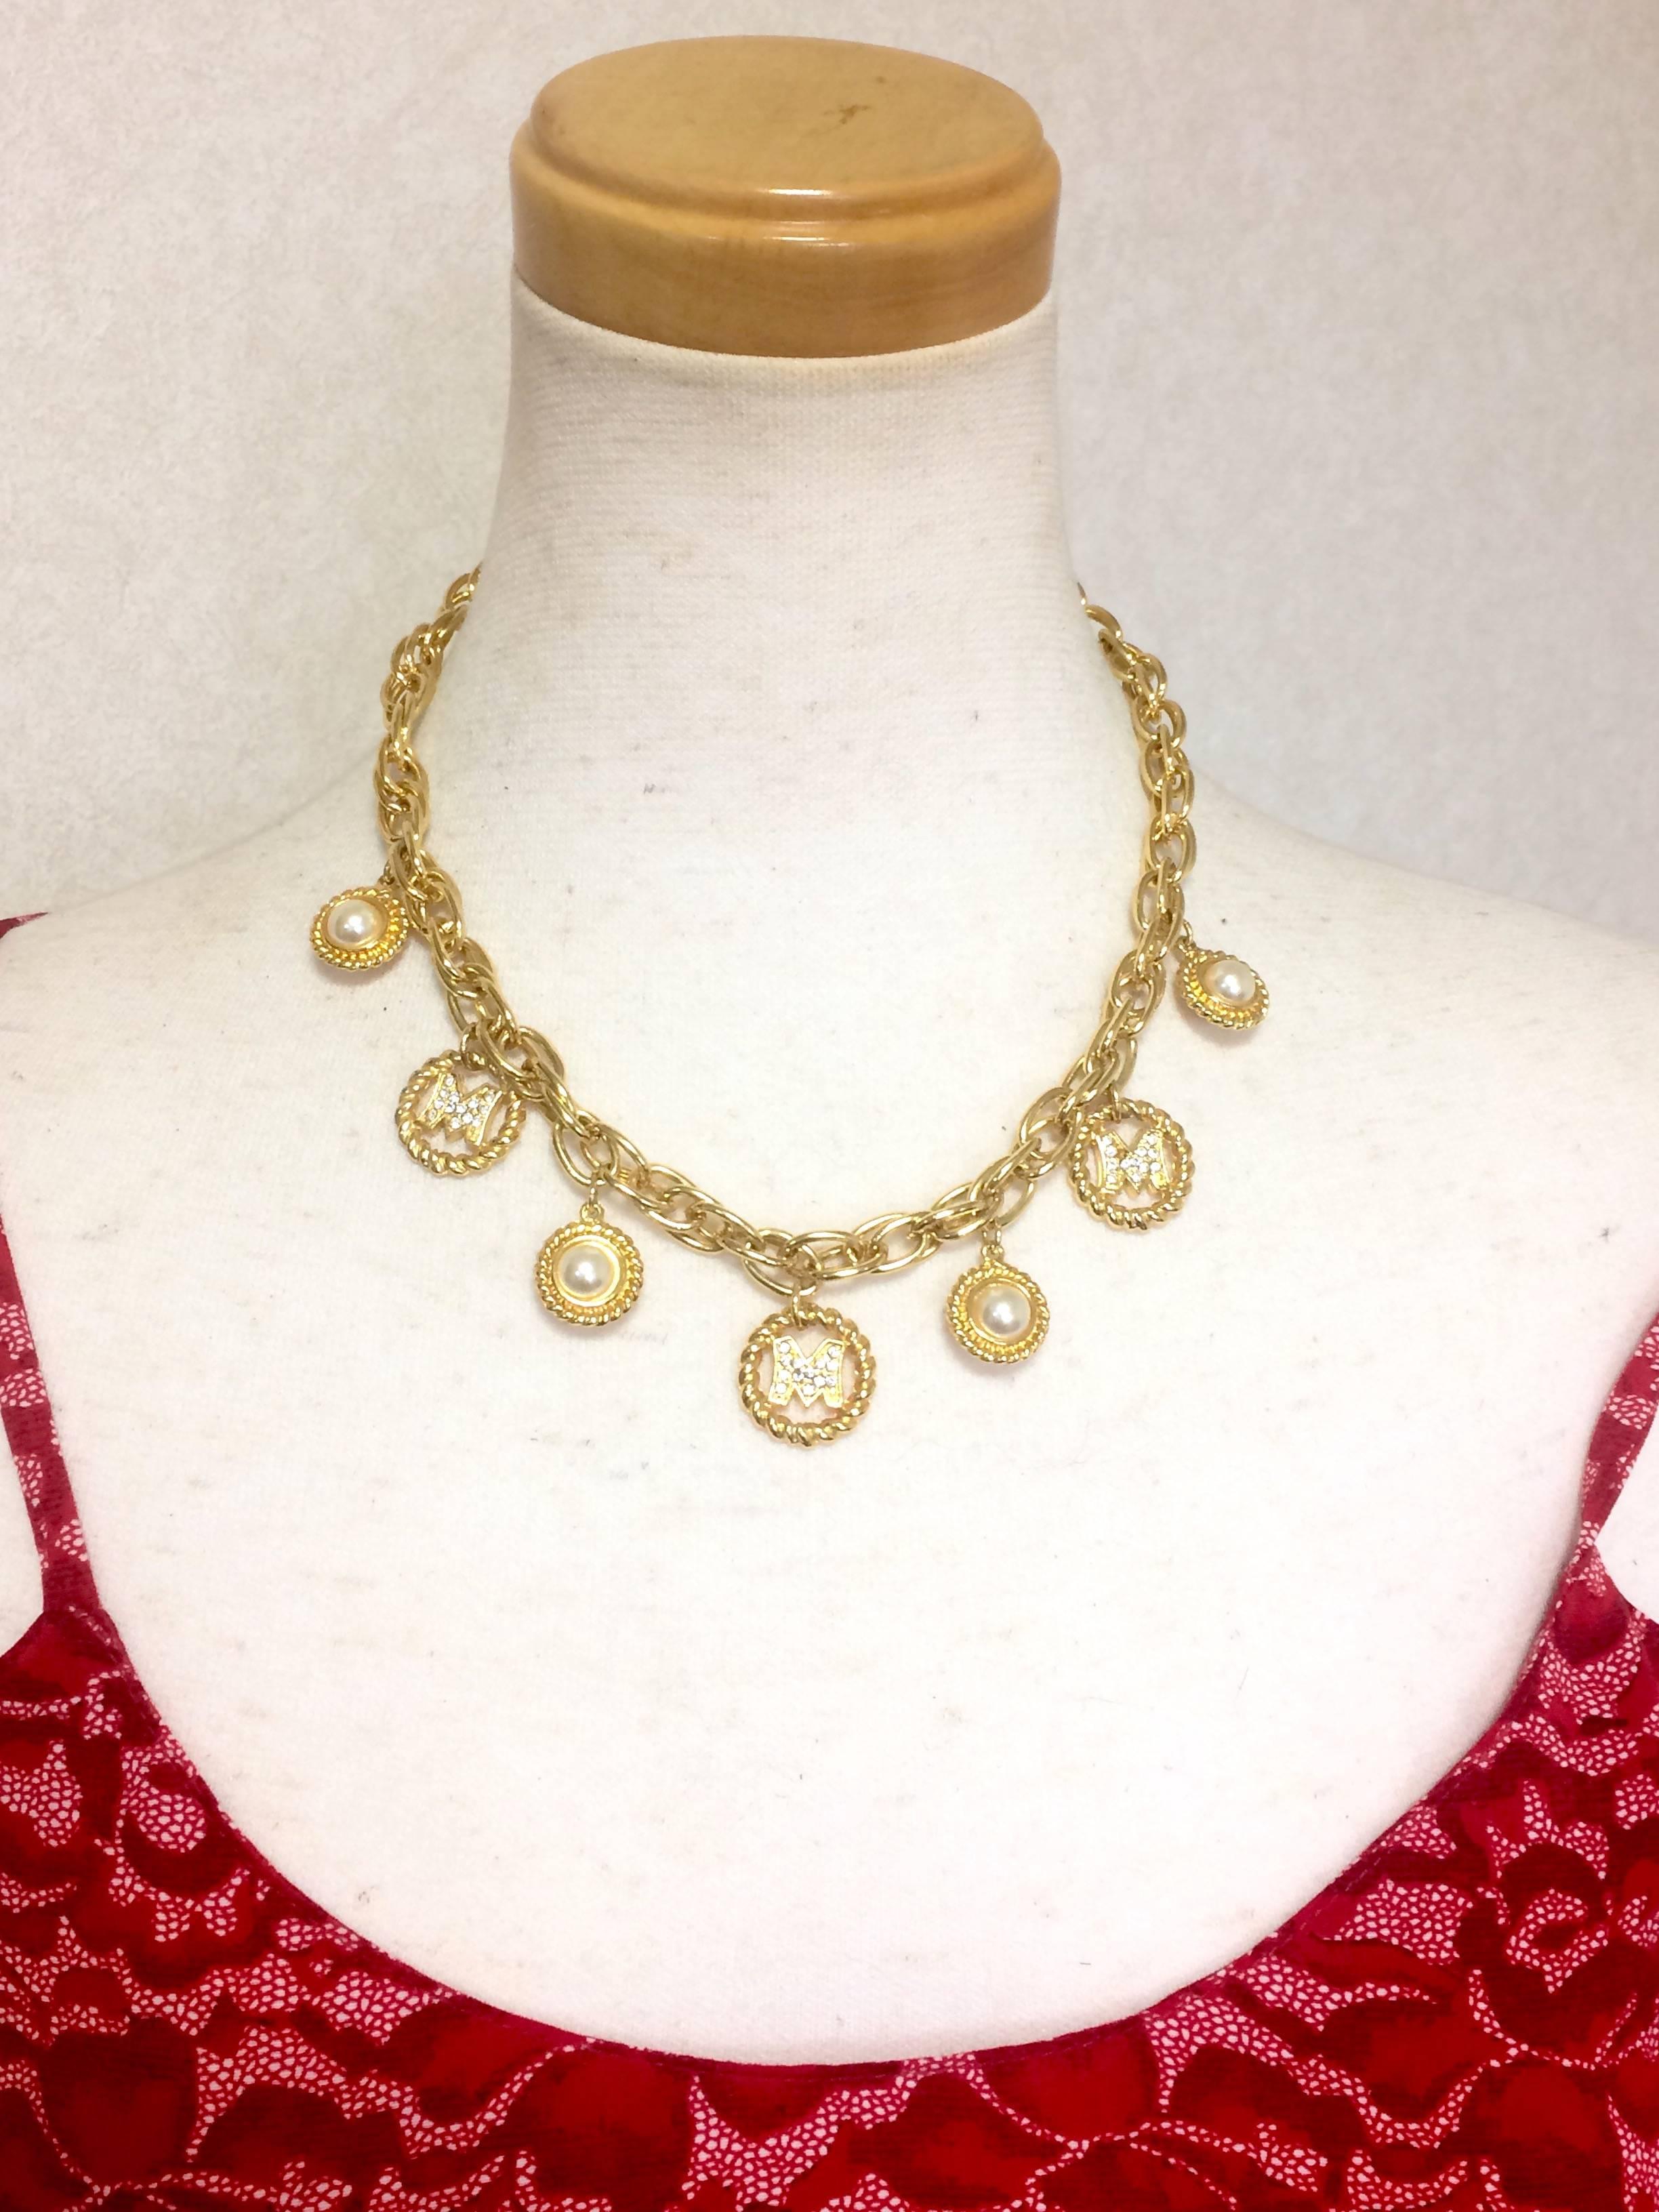 1990s. Vintage Moschino chain statement necklace with golden round dangling charms with faux pearls and letter M rhinestone motifs.

Introducing another rare and fabulous jewelry necklace from MOSCHINO back in the 90's.
It is a gorgeous chain